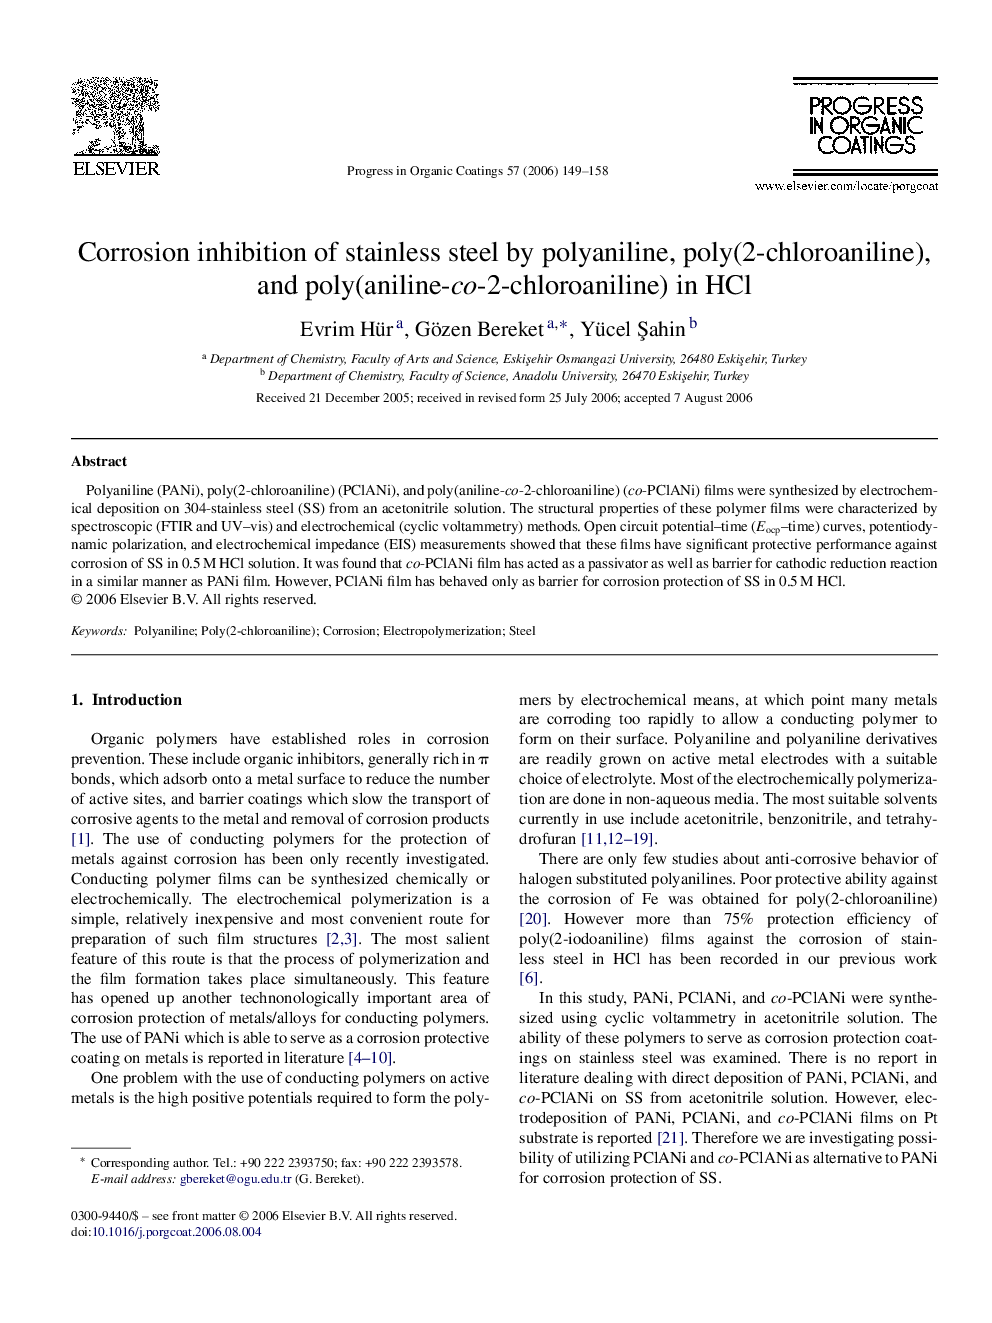 Corrosion inhibition of stainless steel by polyaniline, poly(2-chloroaniline), and poly(aniline-co-2-chloroaniline) in HCl